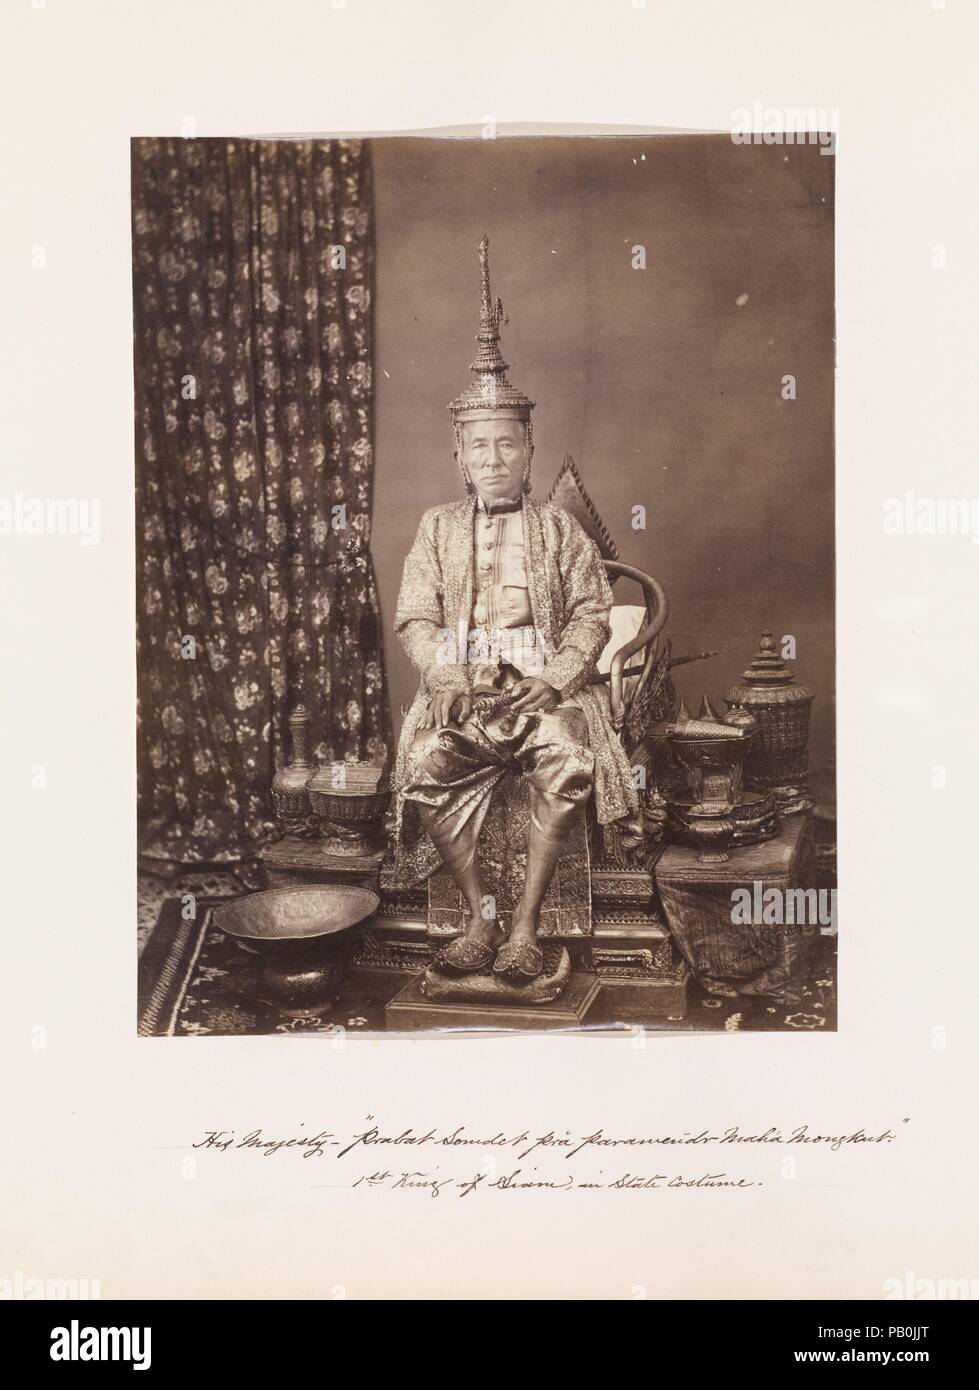 His Majesty Prabat Somdet Pra parameñdr Mahá Mongkut, First King of Siam, in State Costume. Artist: John Thomson (British, Edinburgh, Scotland 1837-1921 London). Dimensions: 22 x 17.2 cm (8 11/16 x 6 3/4 in.). Date: 1865.  John Thomson, a Scotsman who settled in Singapore in 1863, was only beginning his ten-year career as one of the greatest travel photographers of the Far East when he arrived in Bangkok in 1865. Received at the court of King Mongkut, who ruled Thailand as Rama IV from 1851 to 1868, Thomson spent several months in the country, making an excursion to the ruins of Angkor, which  Stock Photo